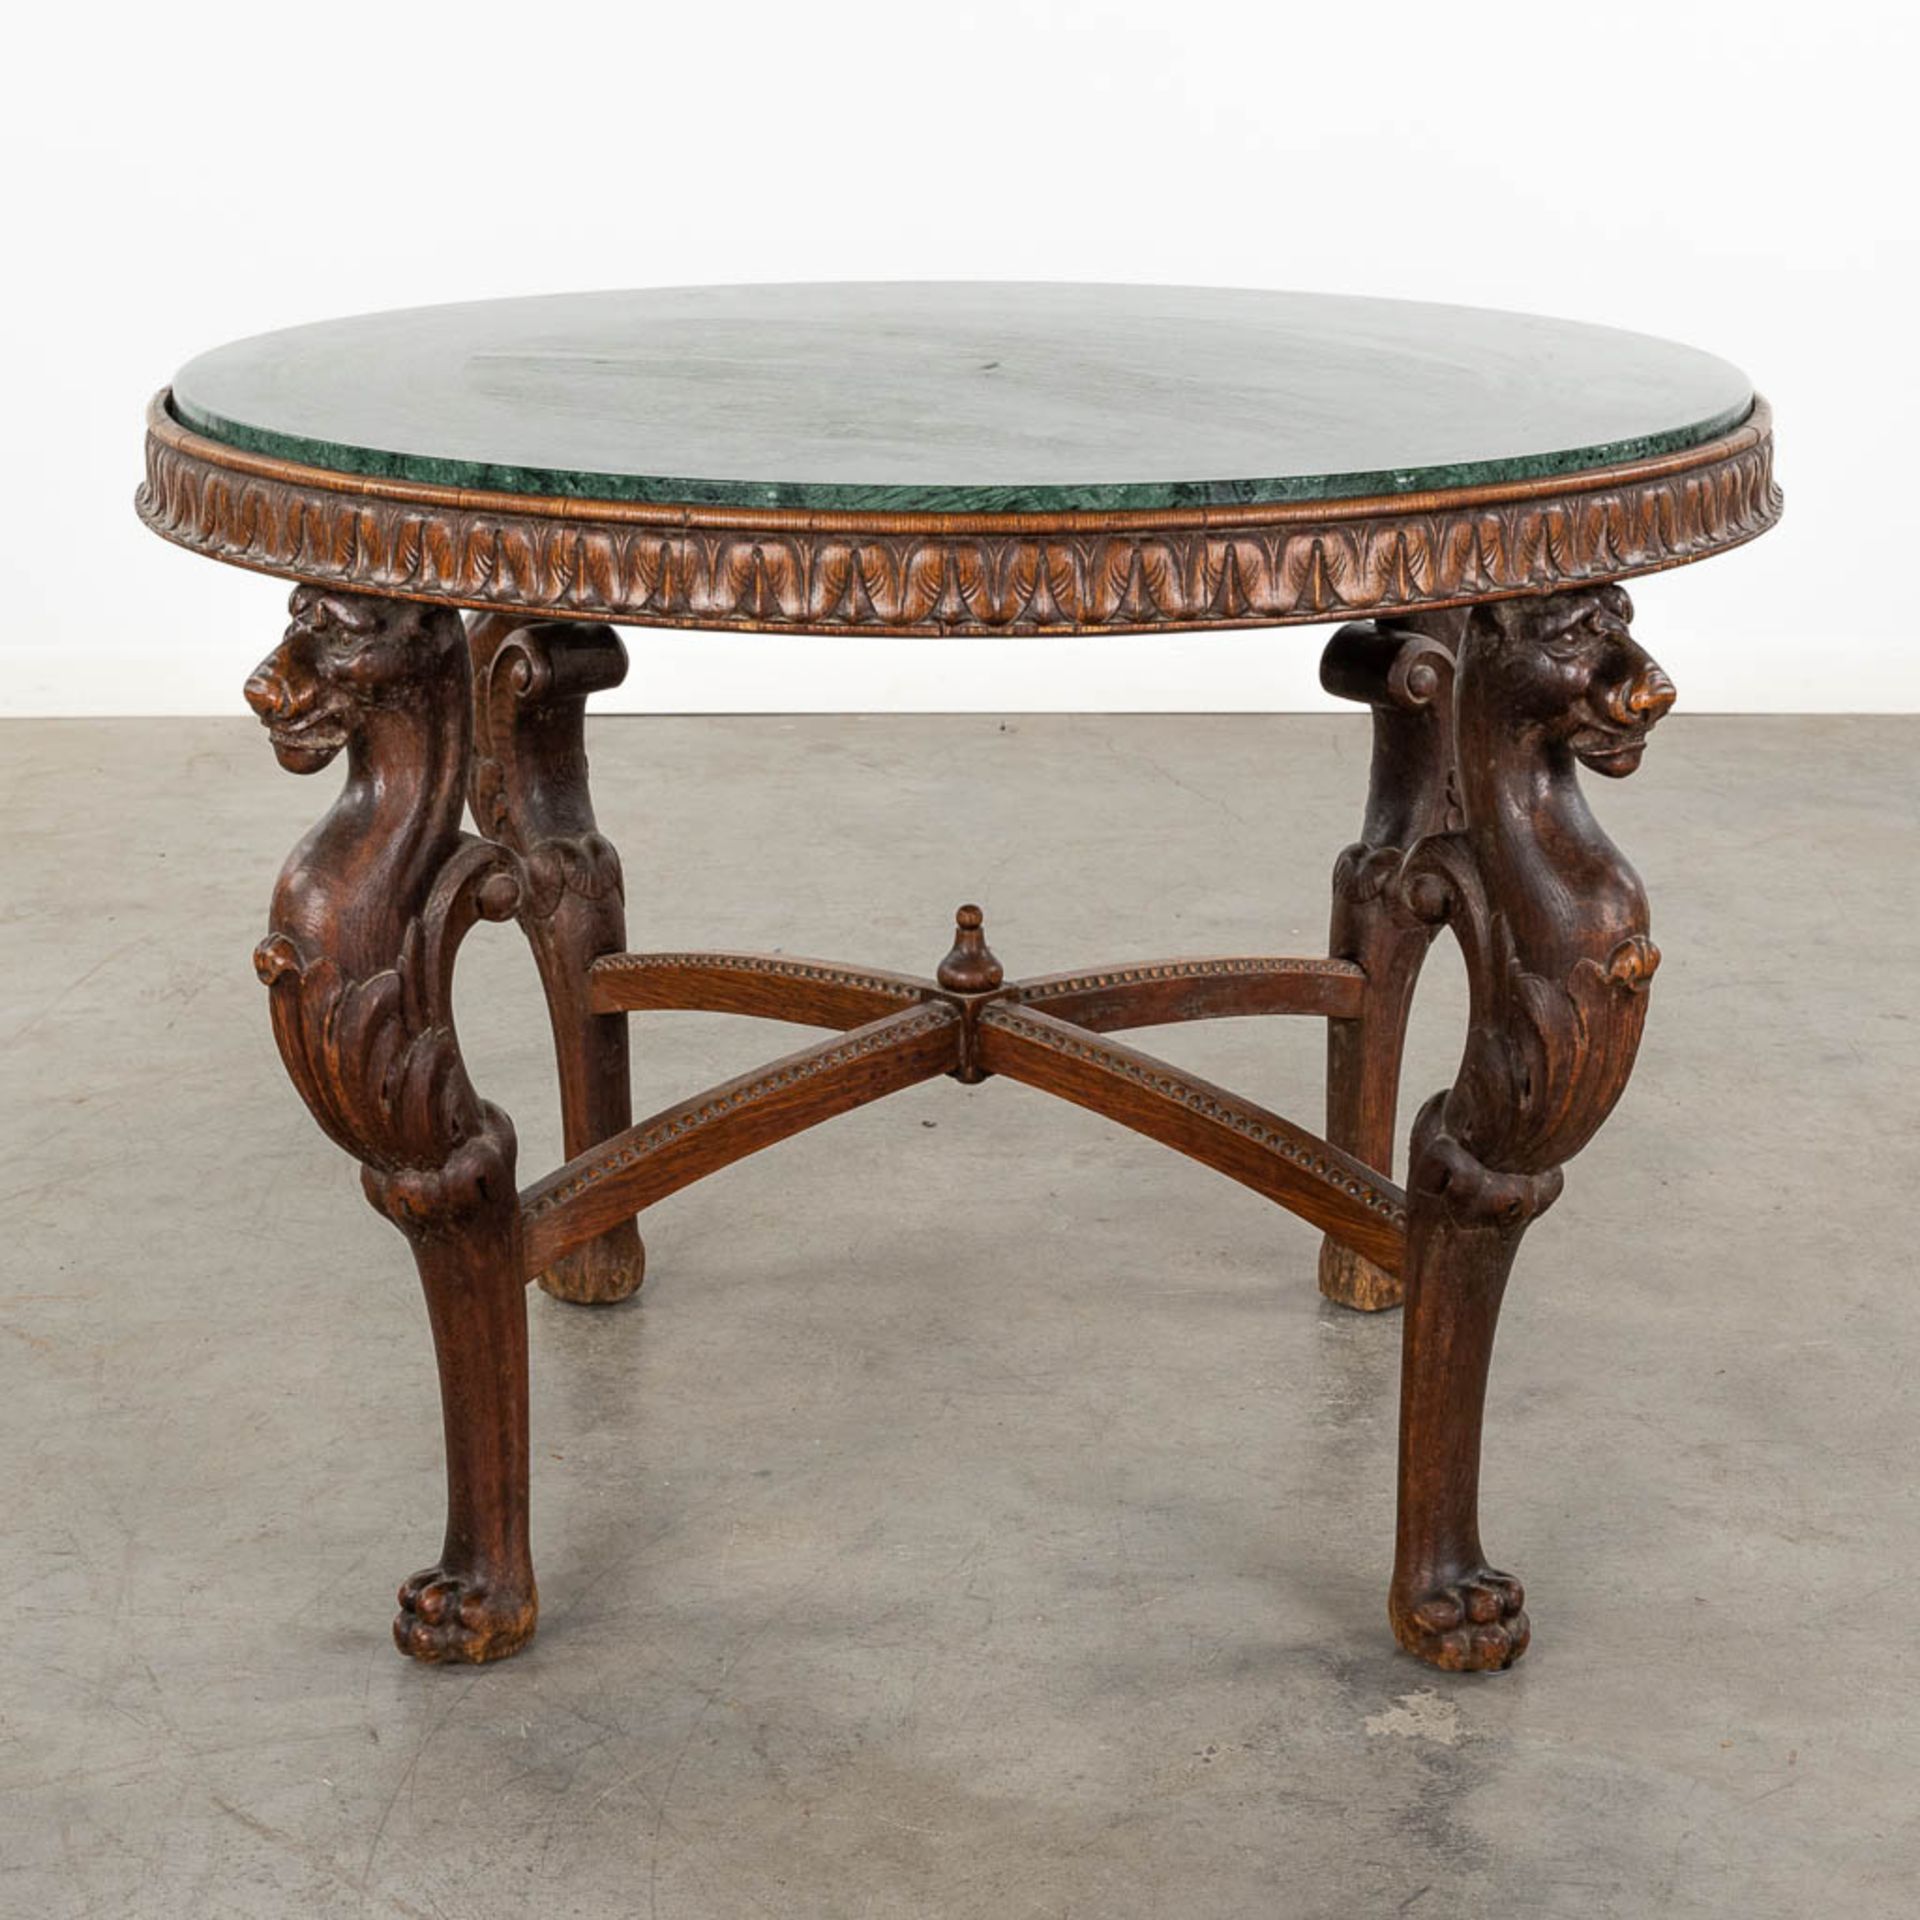 A wood-sculptured coffee table, mythological figurines and a green marble top. 20th C. (D:93 x W:93  - Bild 3 aus 13